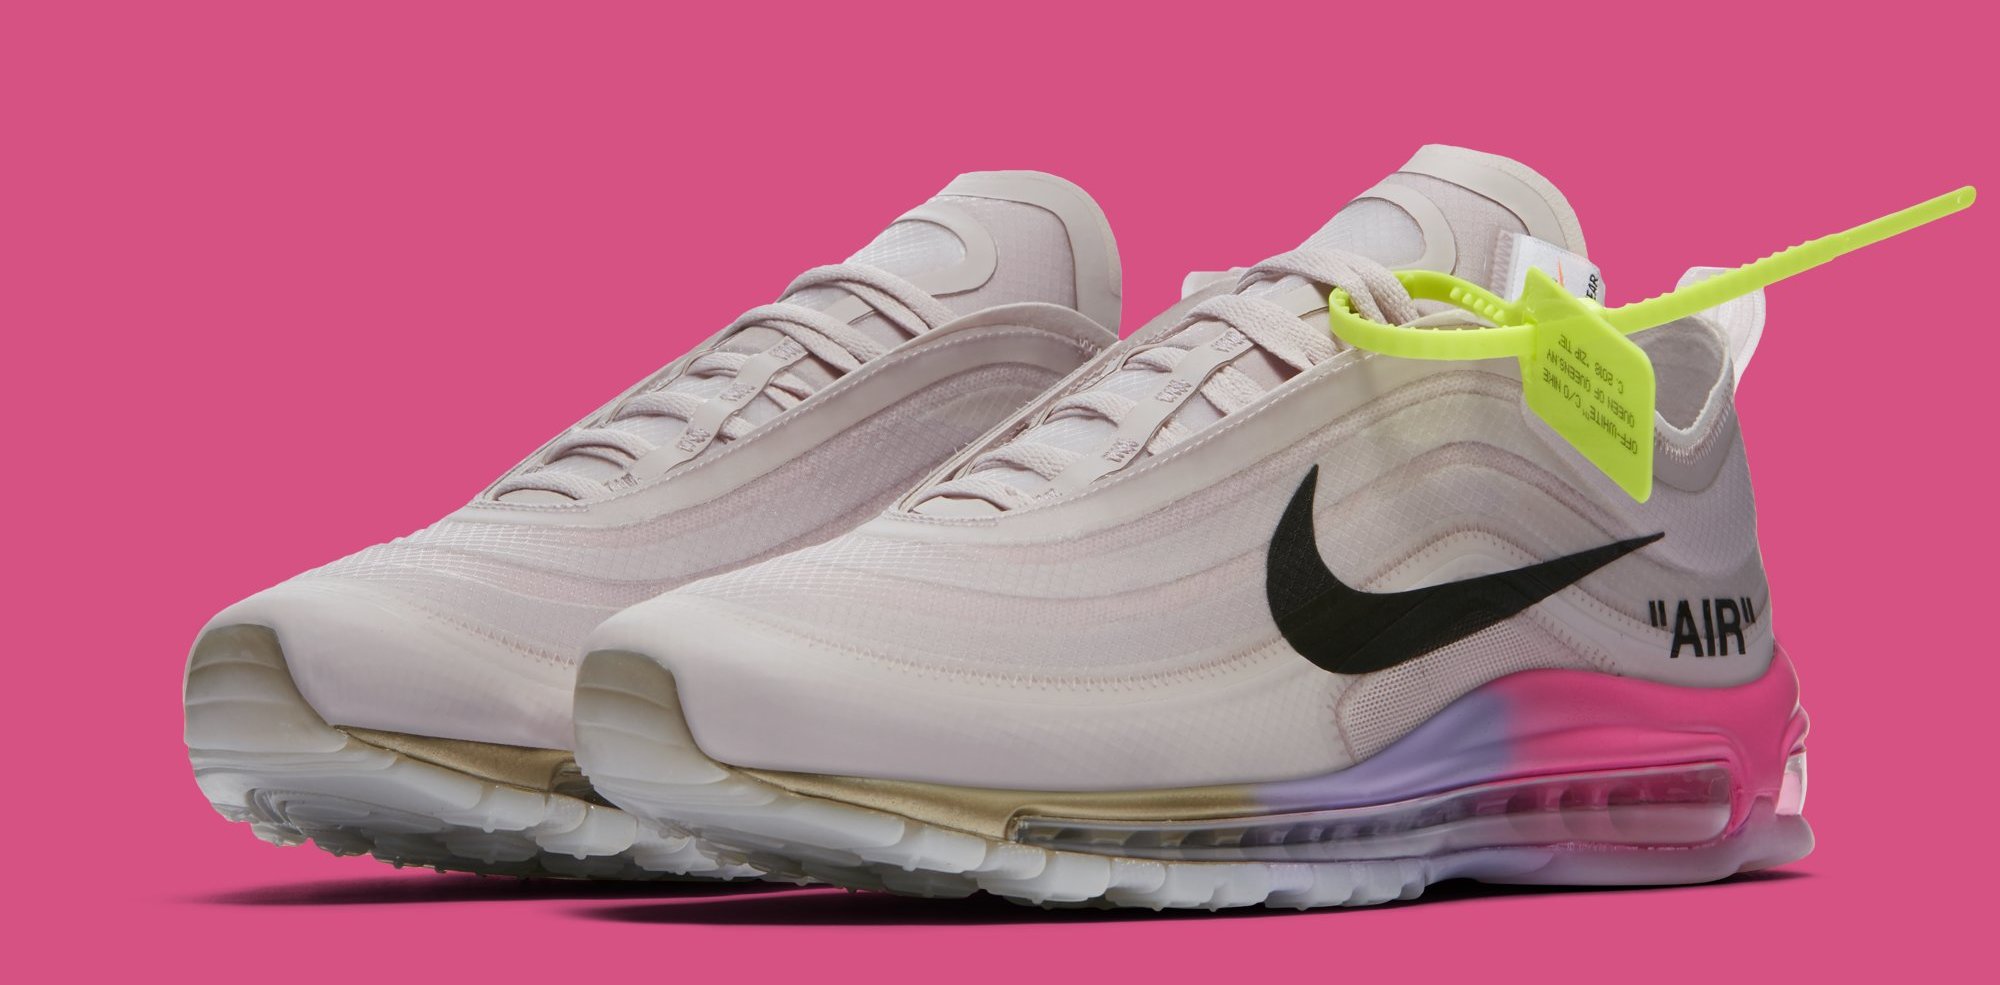 Serena Williams' Off-White x Air Max 97s Released Out of Nowhere 